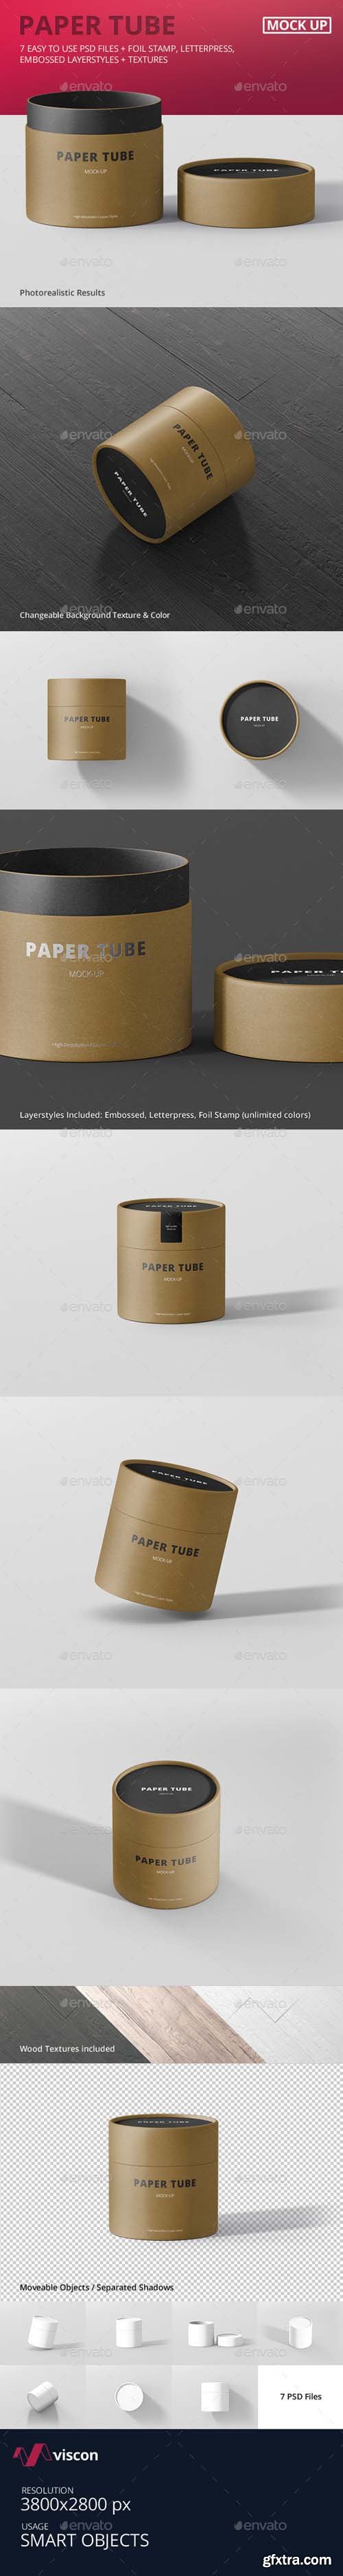 GR - Paper Tube Packaging Mock-Up - Small 16430657